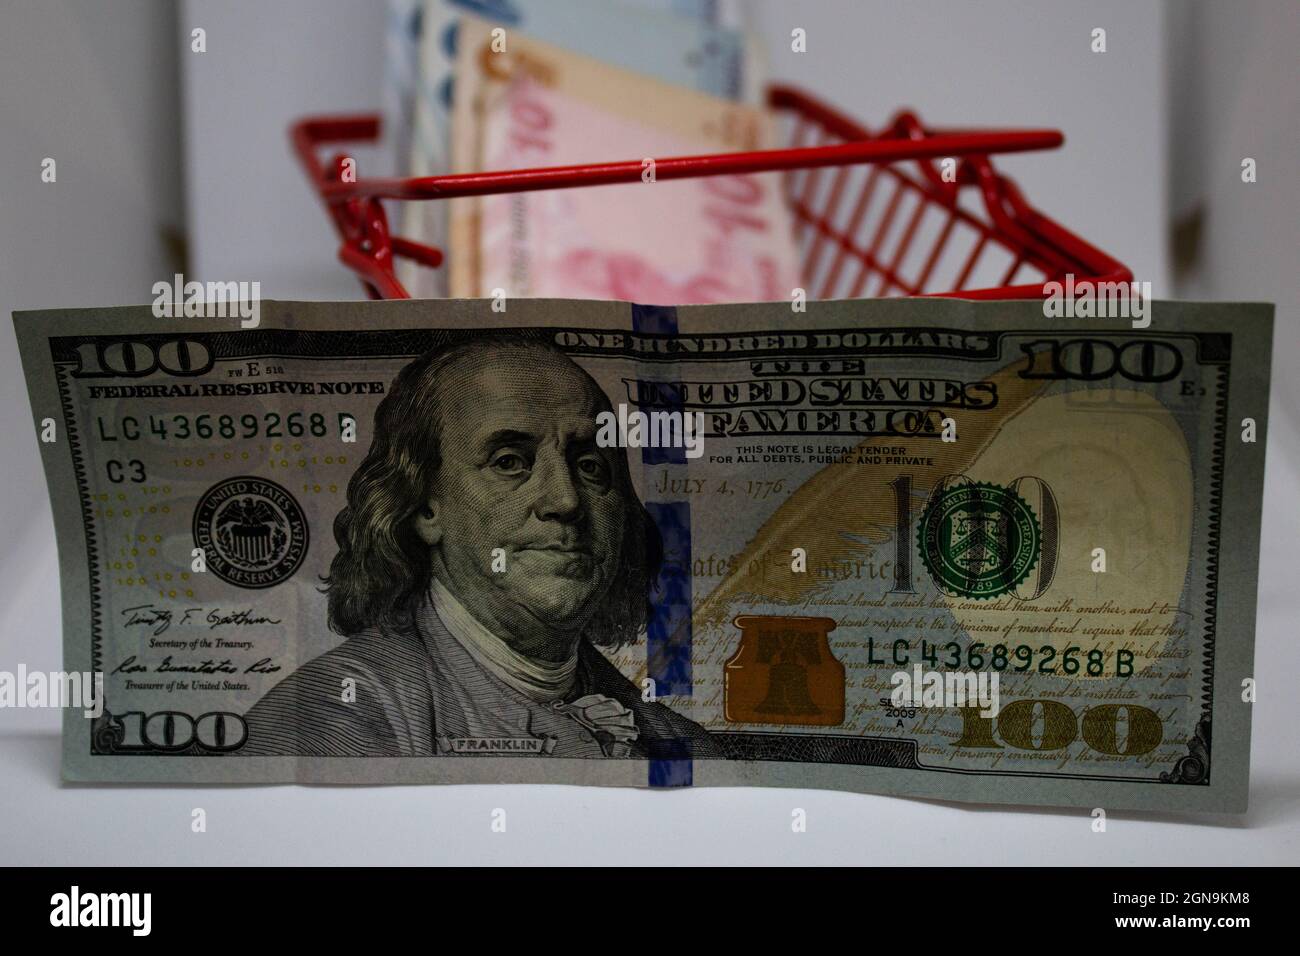 100 dollar bill in front of Turkish liras in a red shopping cart. Showing  how valuable